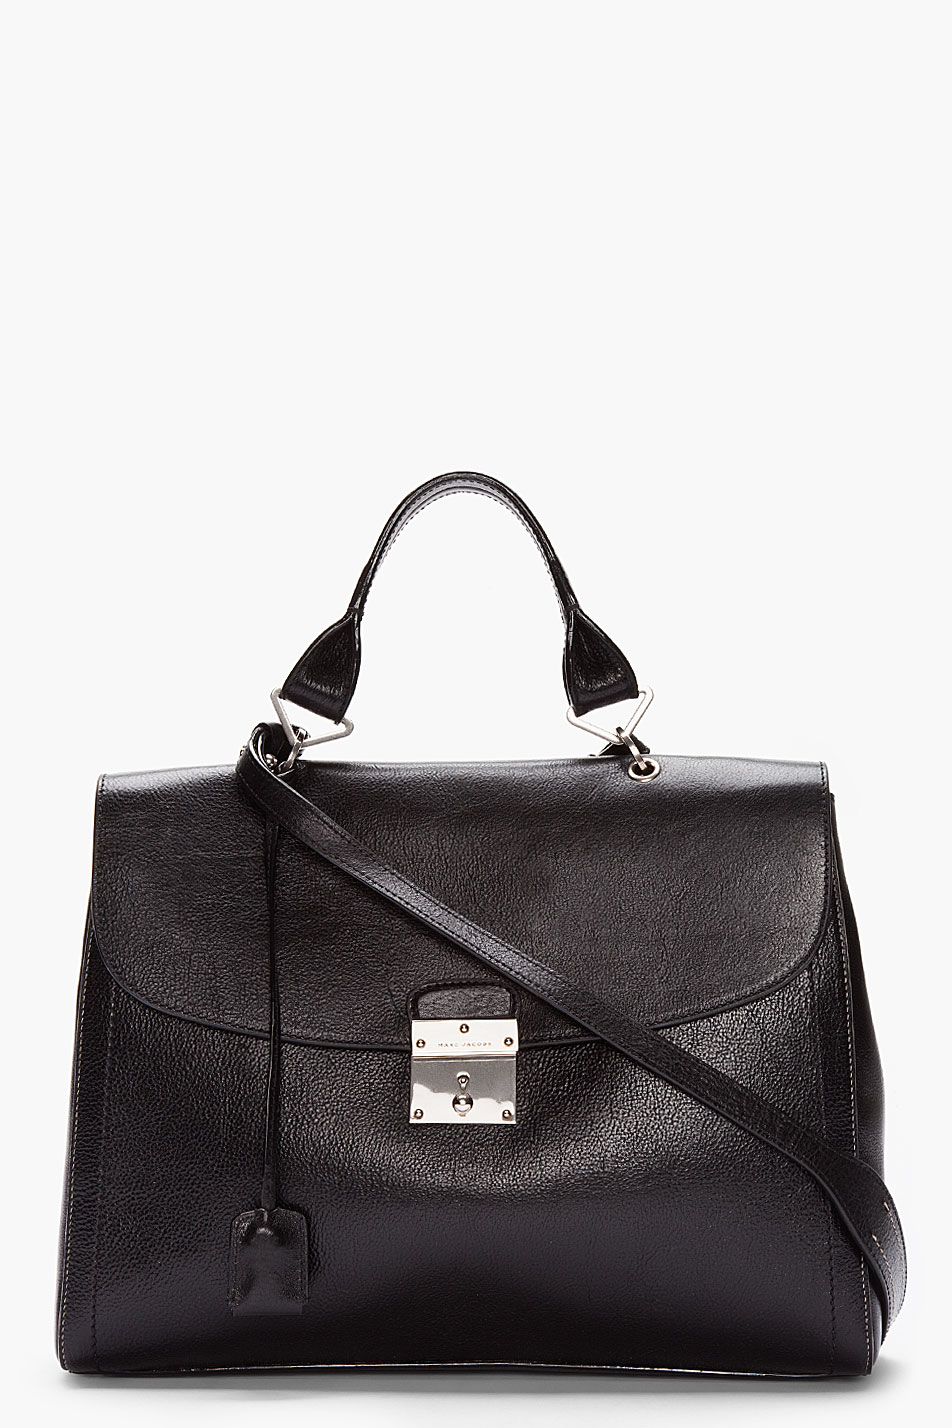 Marc Jacobs Black Pebbled Leather Tote in Black | Lyst